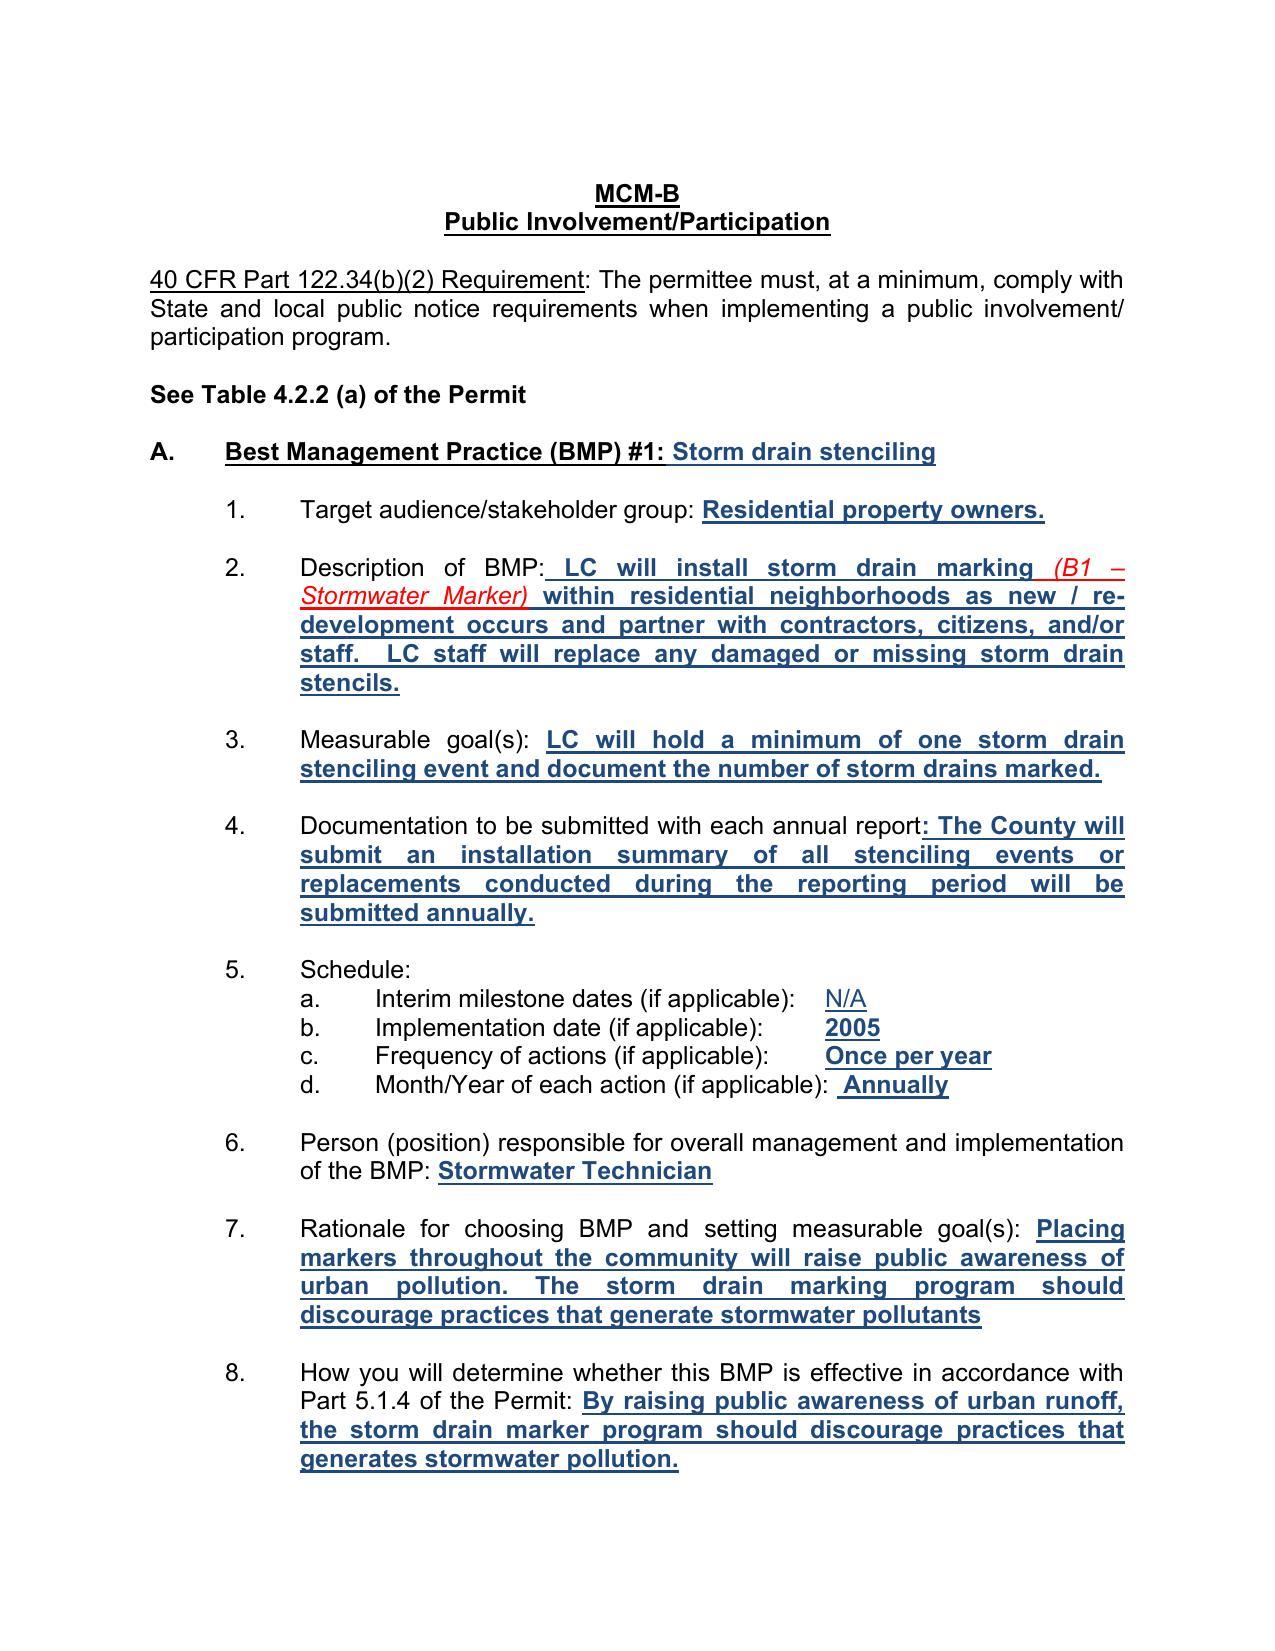 State and local public notice requirements when implementing a public involvement/participation program.